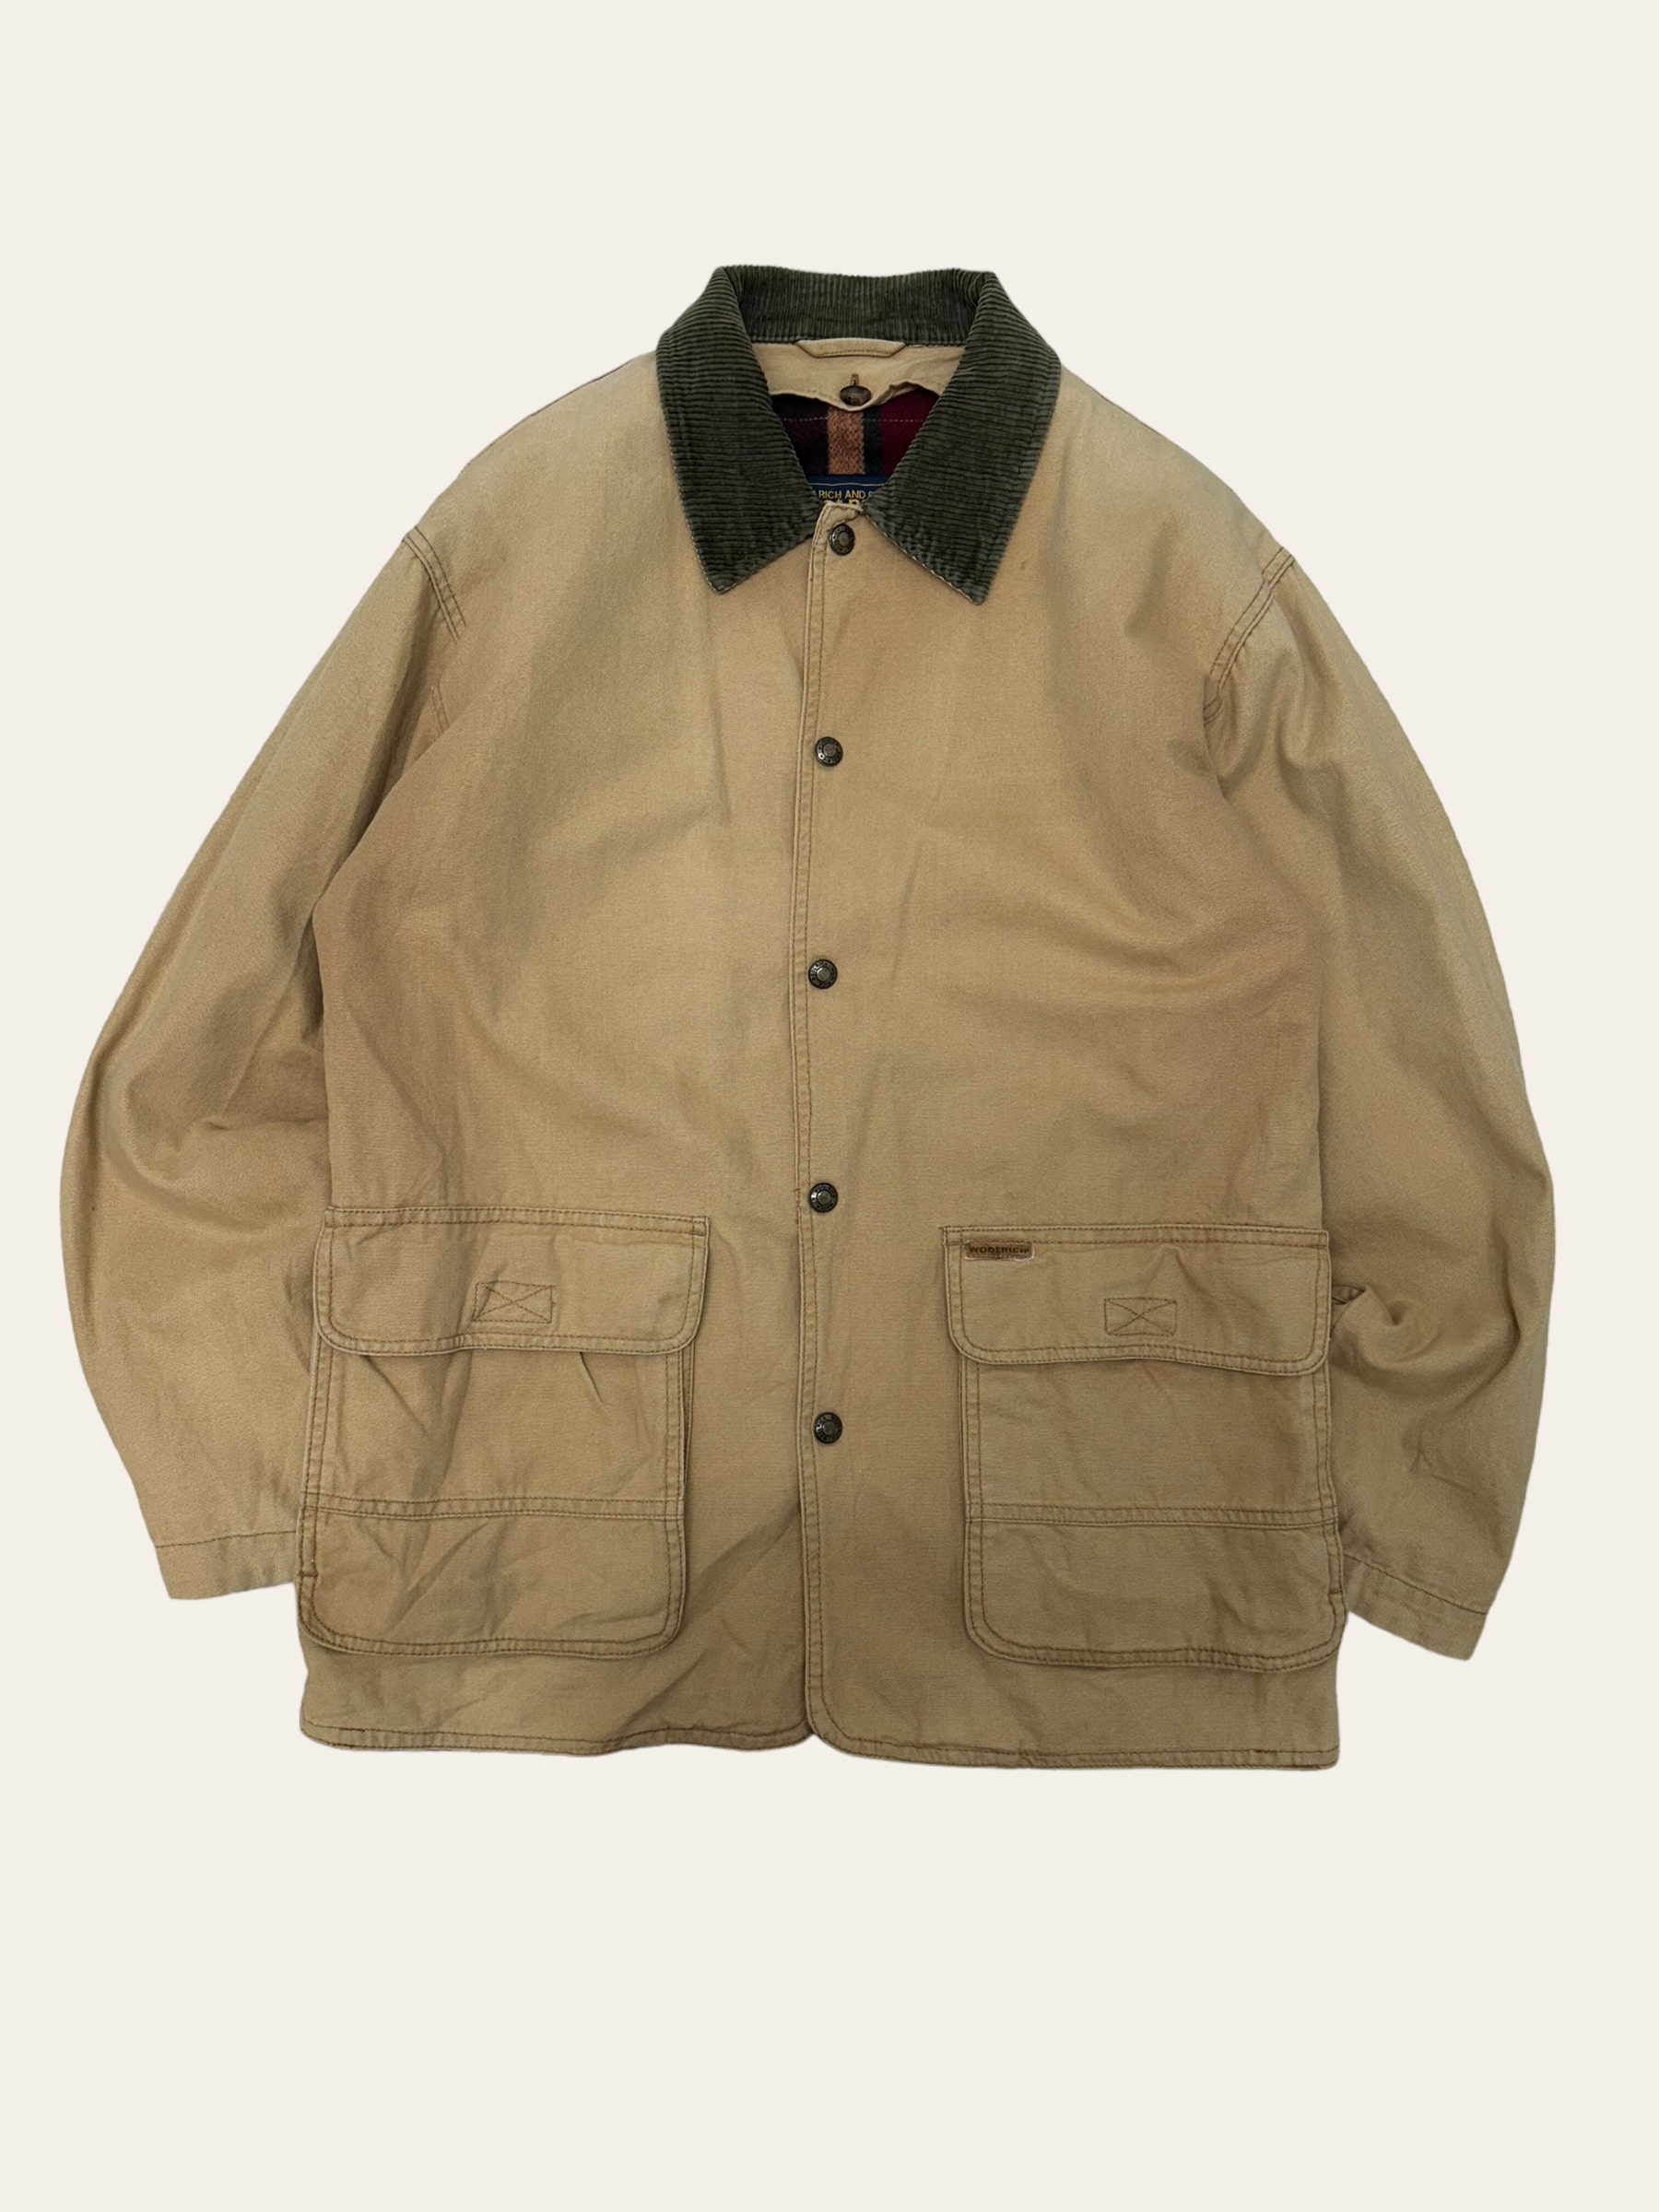 Woolrich tan color canvas hunting jacket M